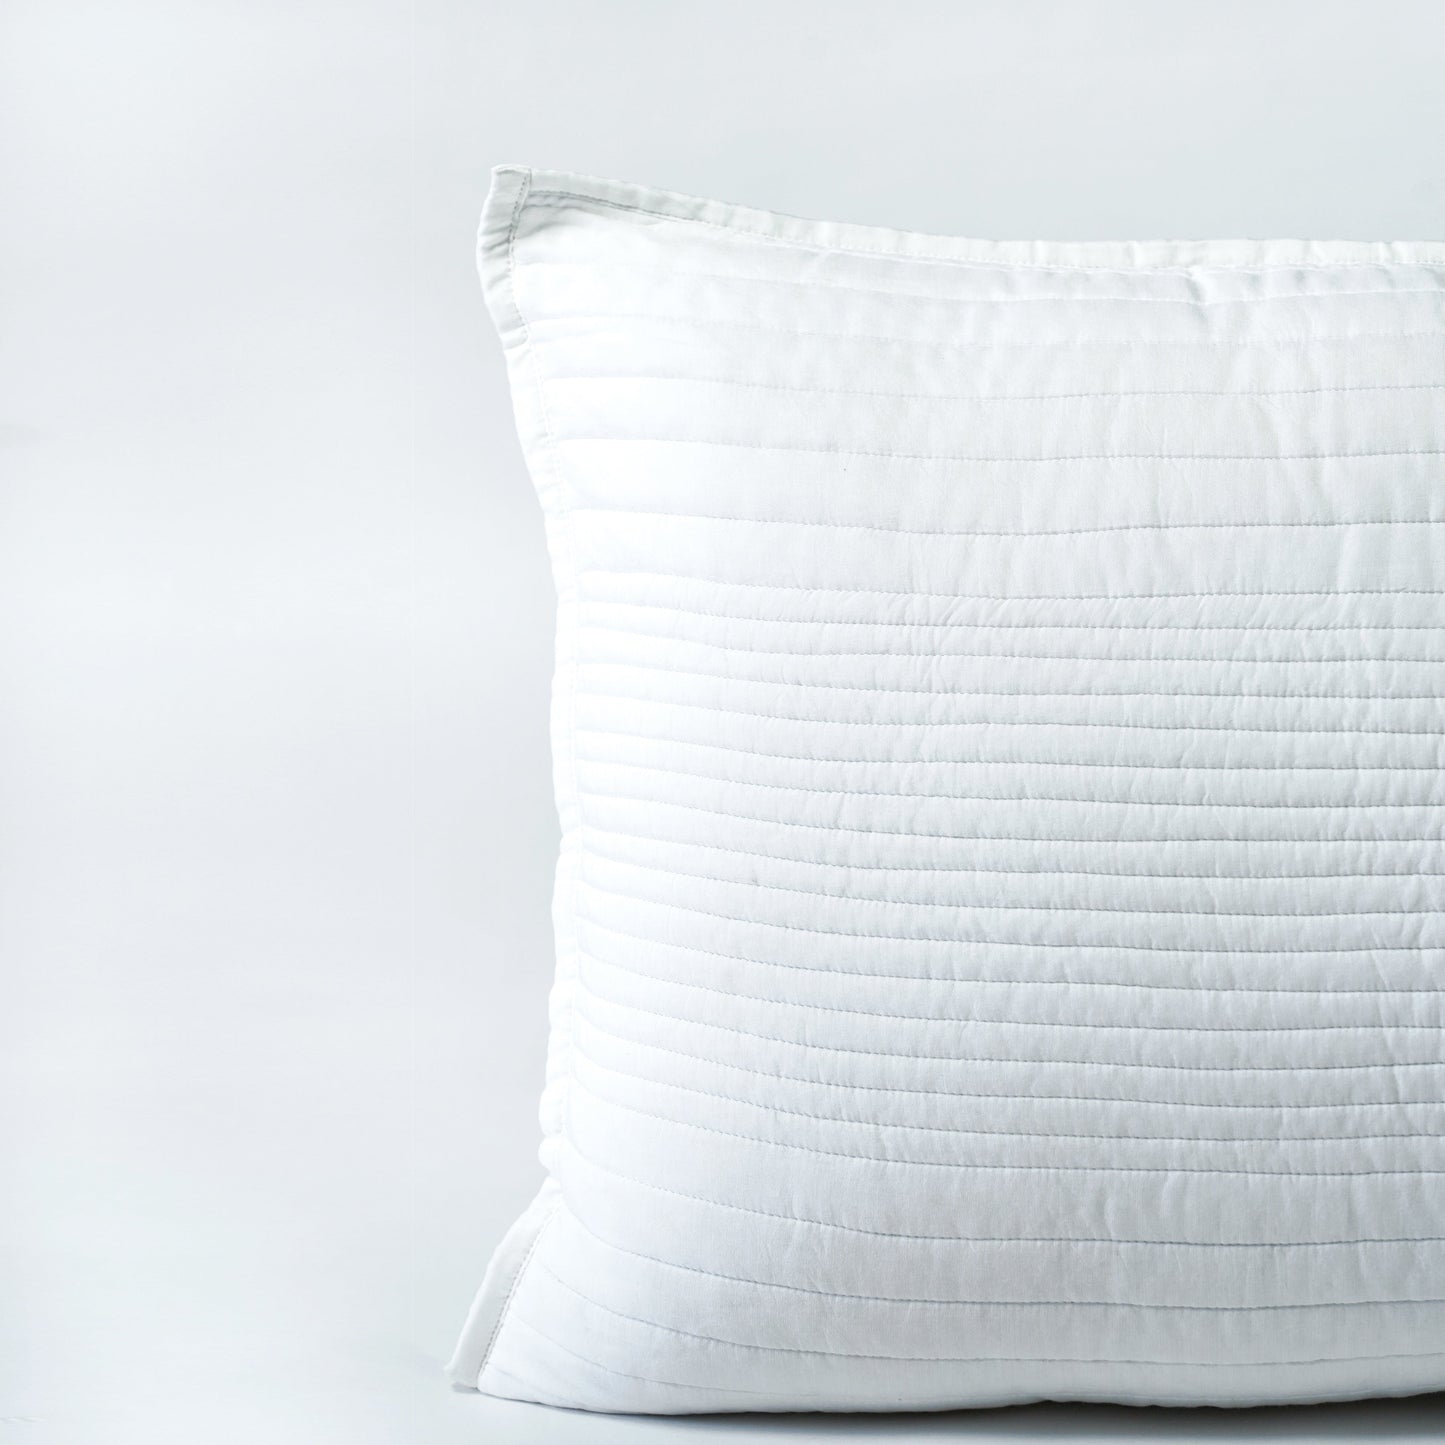 SHWET - White luxury 300TC cotton satin Quilted pillow cases, Sizes available